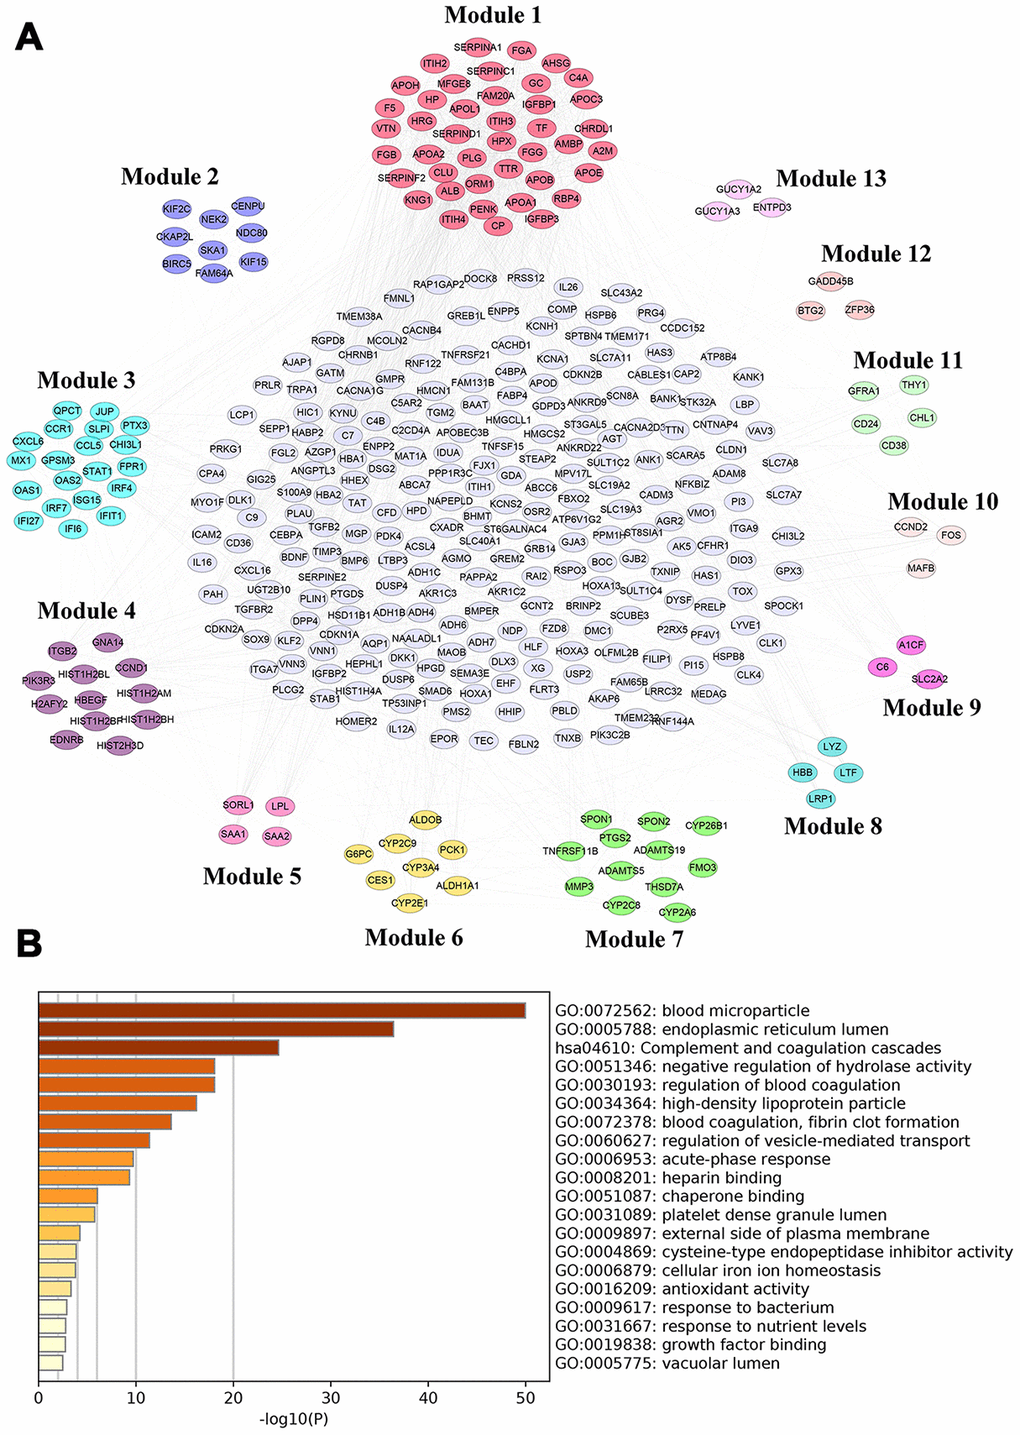 PPI network analysis for differentially-expressed mRNAs. (A) PPI network of differentially-expressed mRNAs analyzed by STRING database and Module (1-13) were selected from PPI network using MCODE analysis. (B) Functional enrichment analysis of hub genes (Module 1) were performed using Metascape.